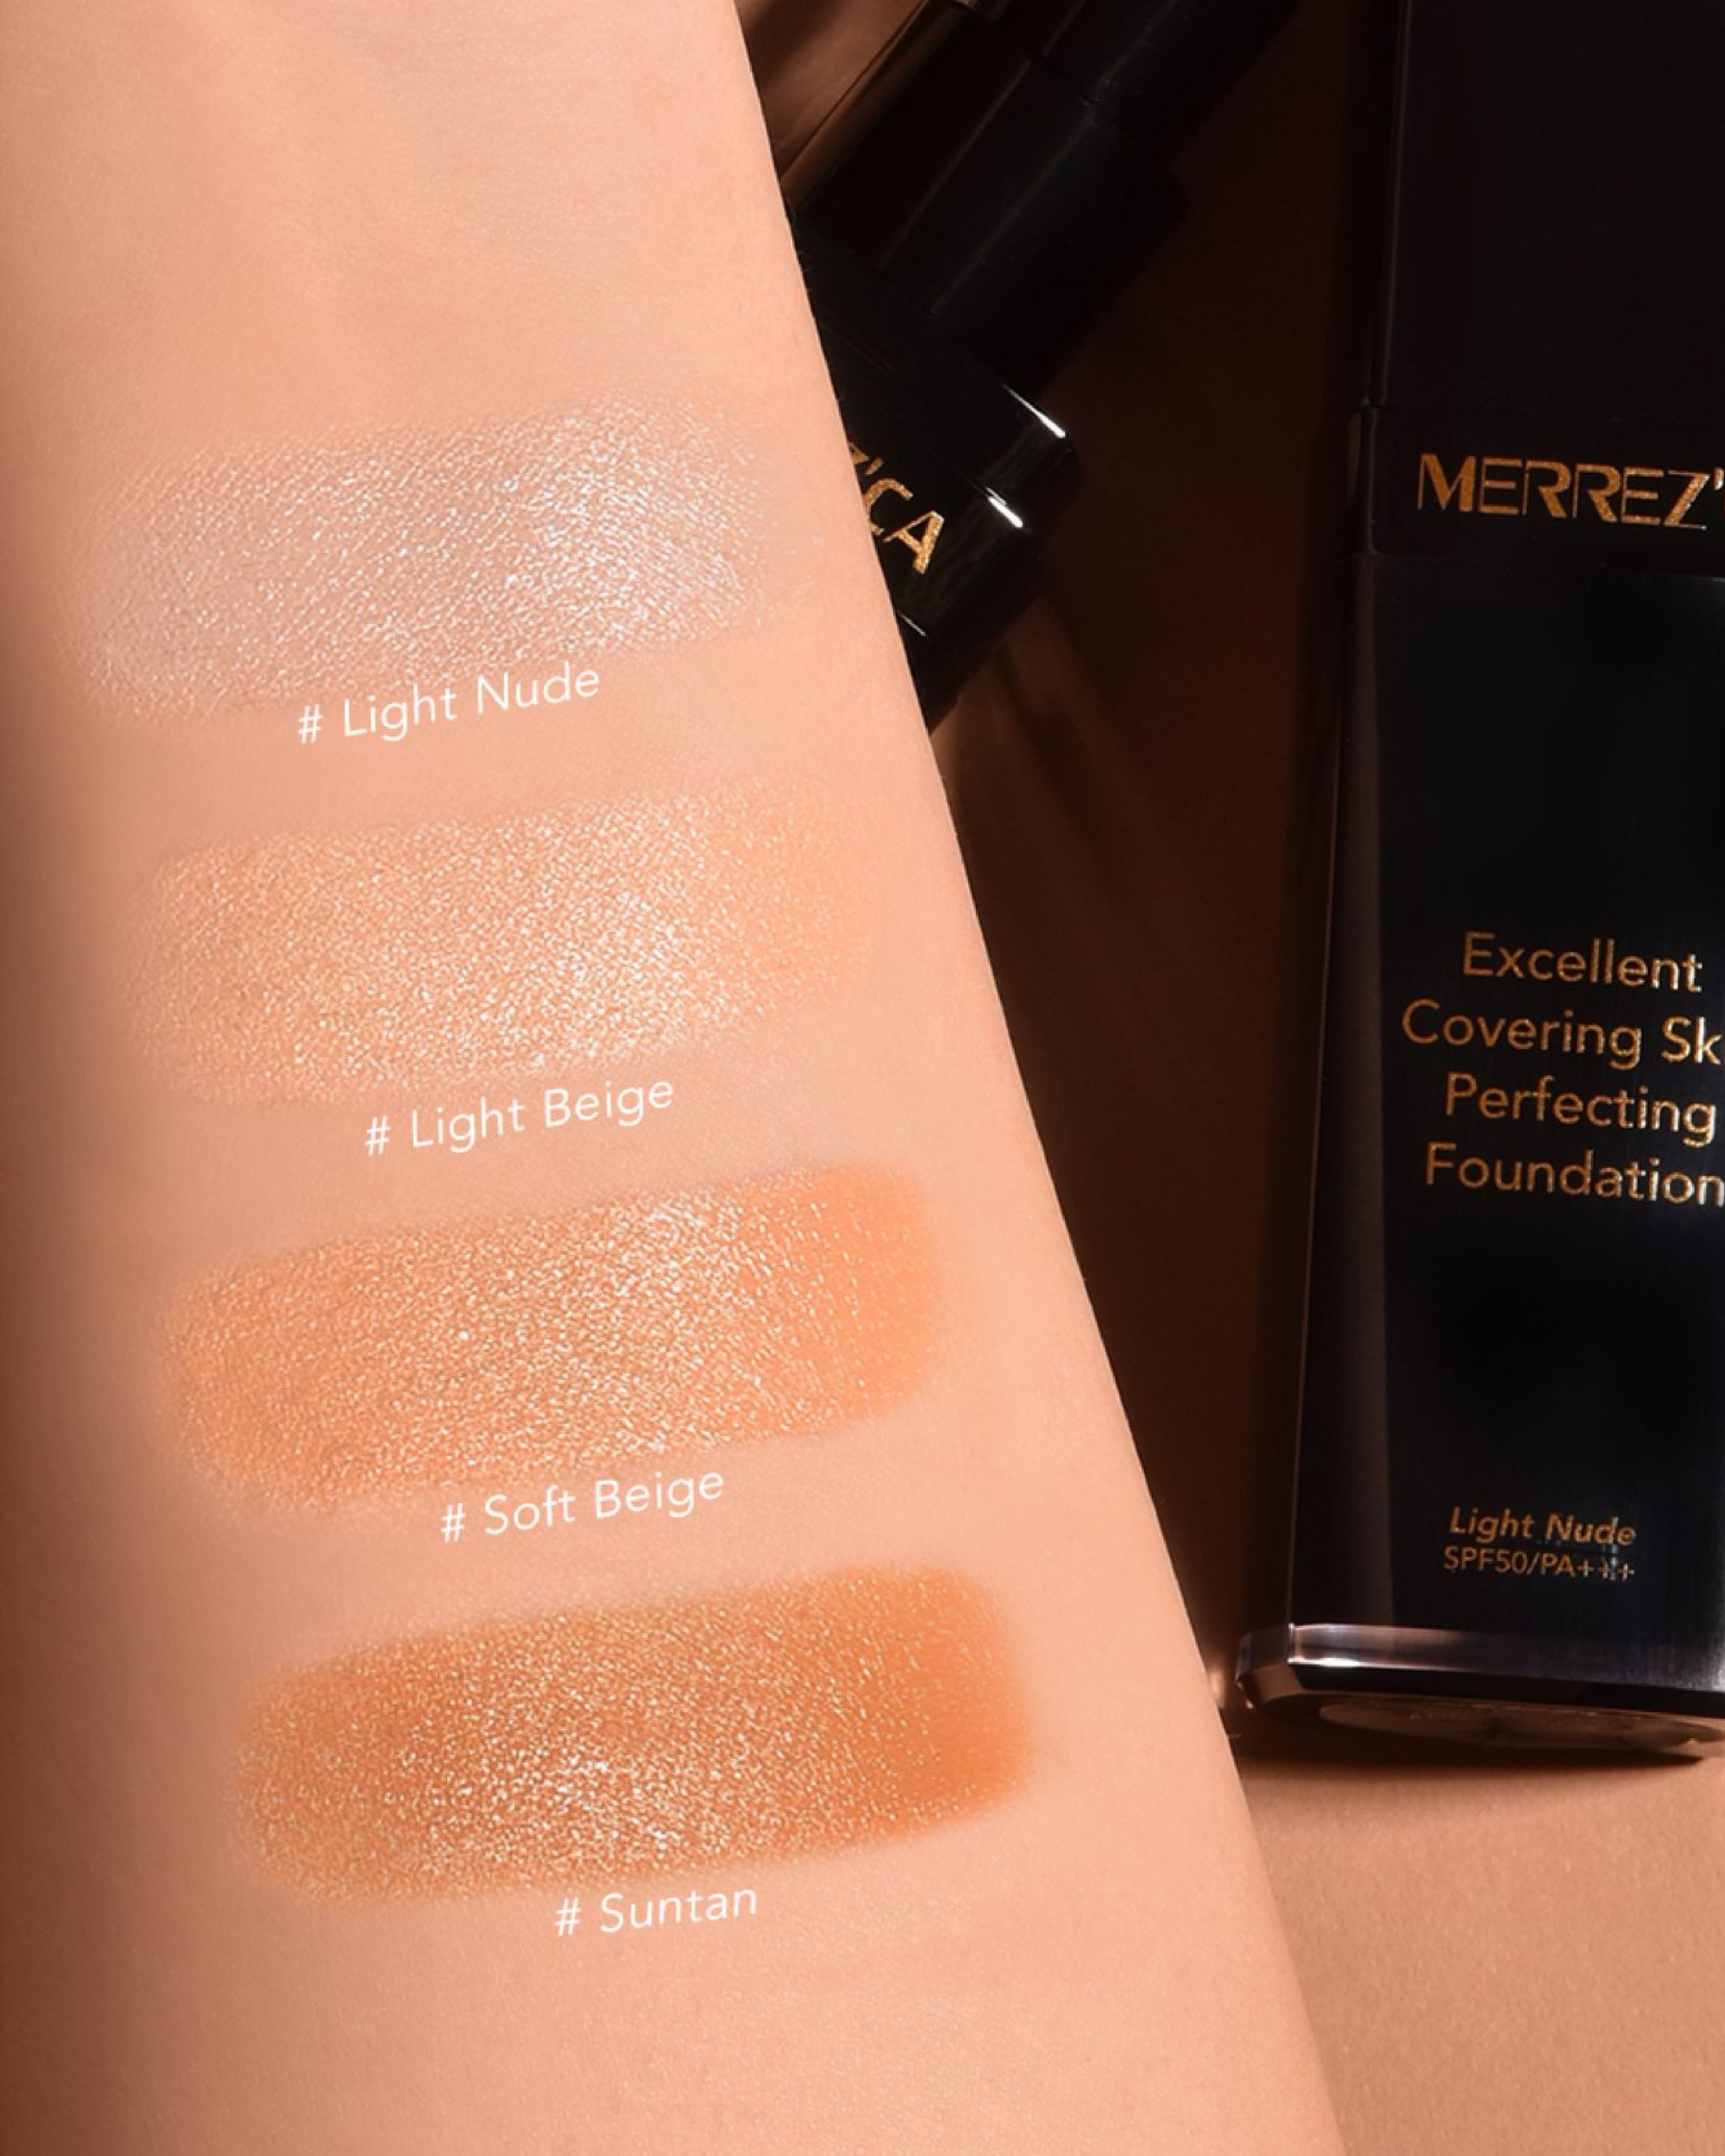 Merrezca Excellent Covering Skin Perfecting Foundation SPF50/PA+++